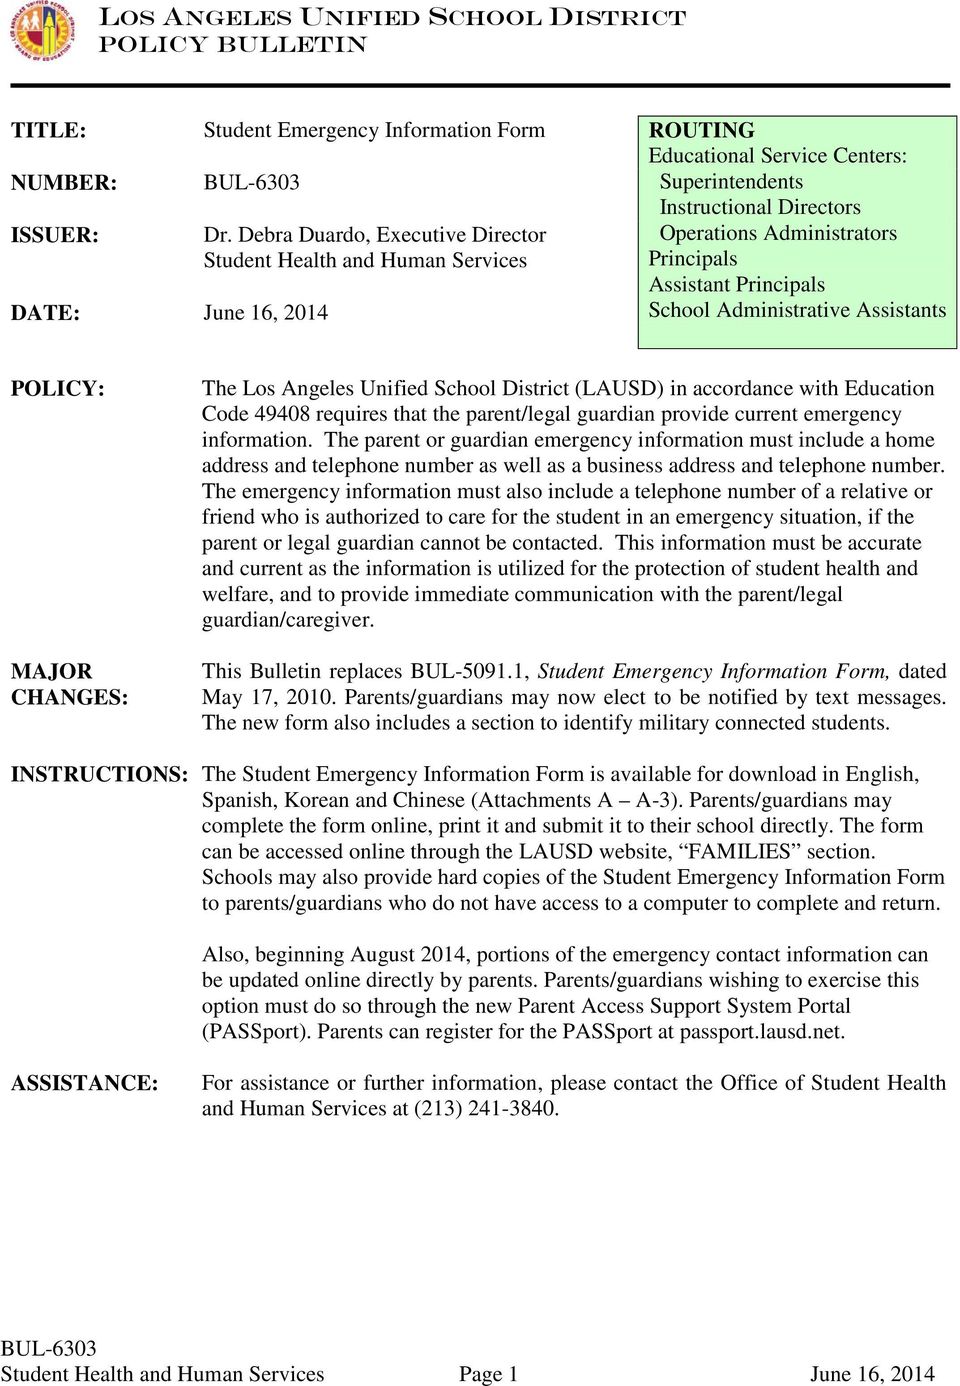 School Administrative Assistants POLICY: MAJOR CHANGES: The Los Angeles Unified School District (LAUSD) in accordance with Education Code 49408 requires that the parent/legal guardian provide current